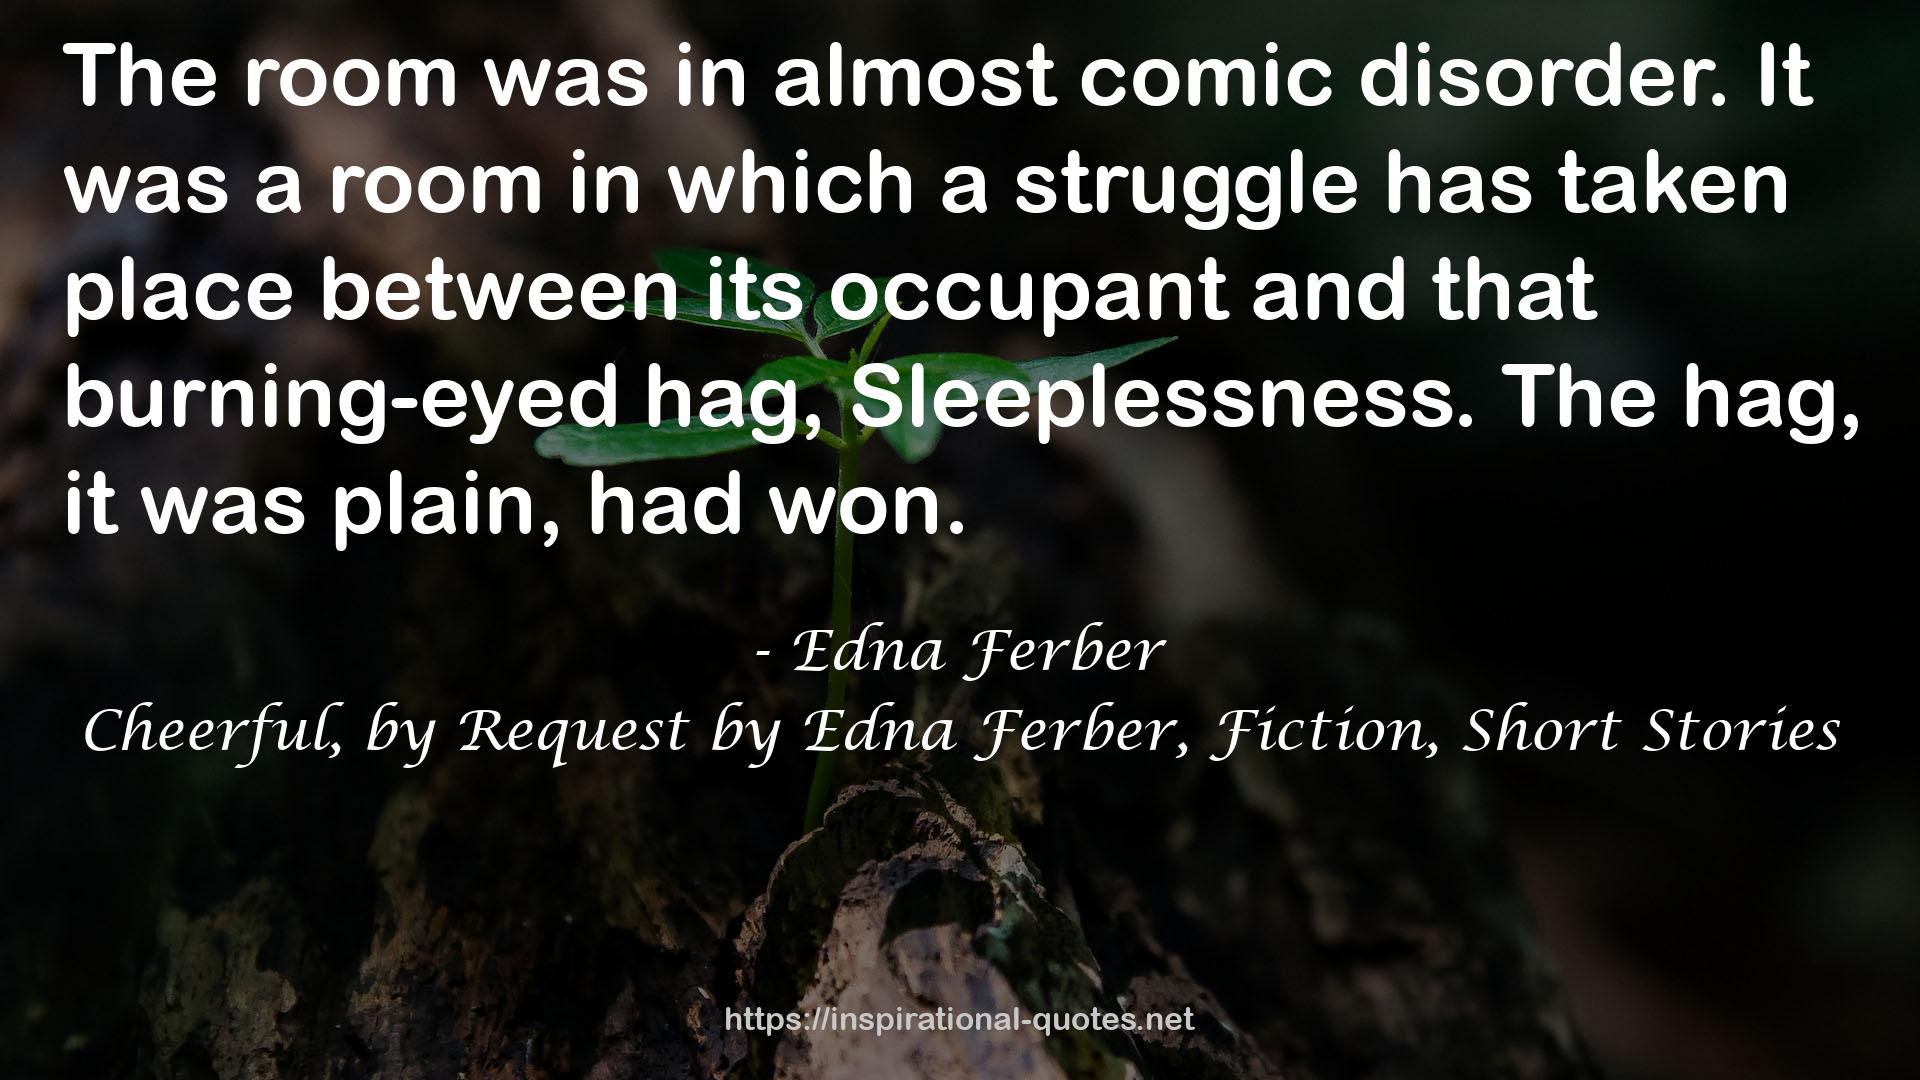 Cheerful, by Request by Edna Ferber, Fiction, Short Stories QUOTES